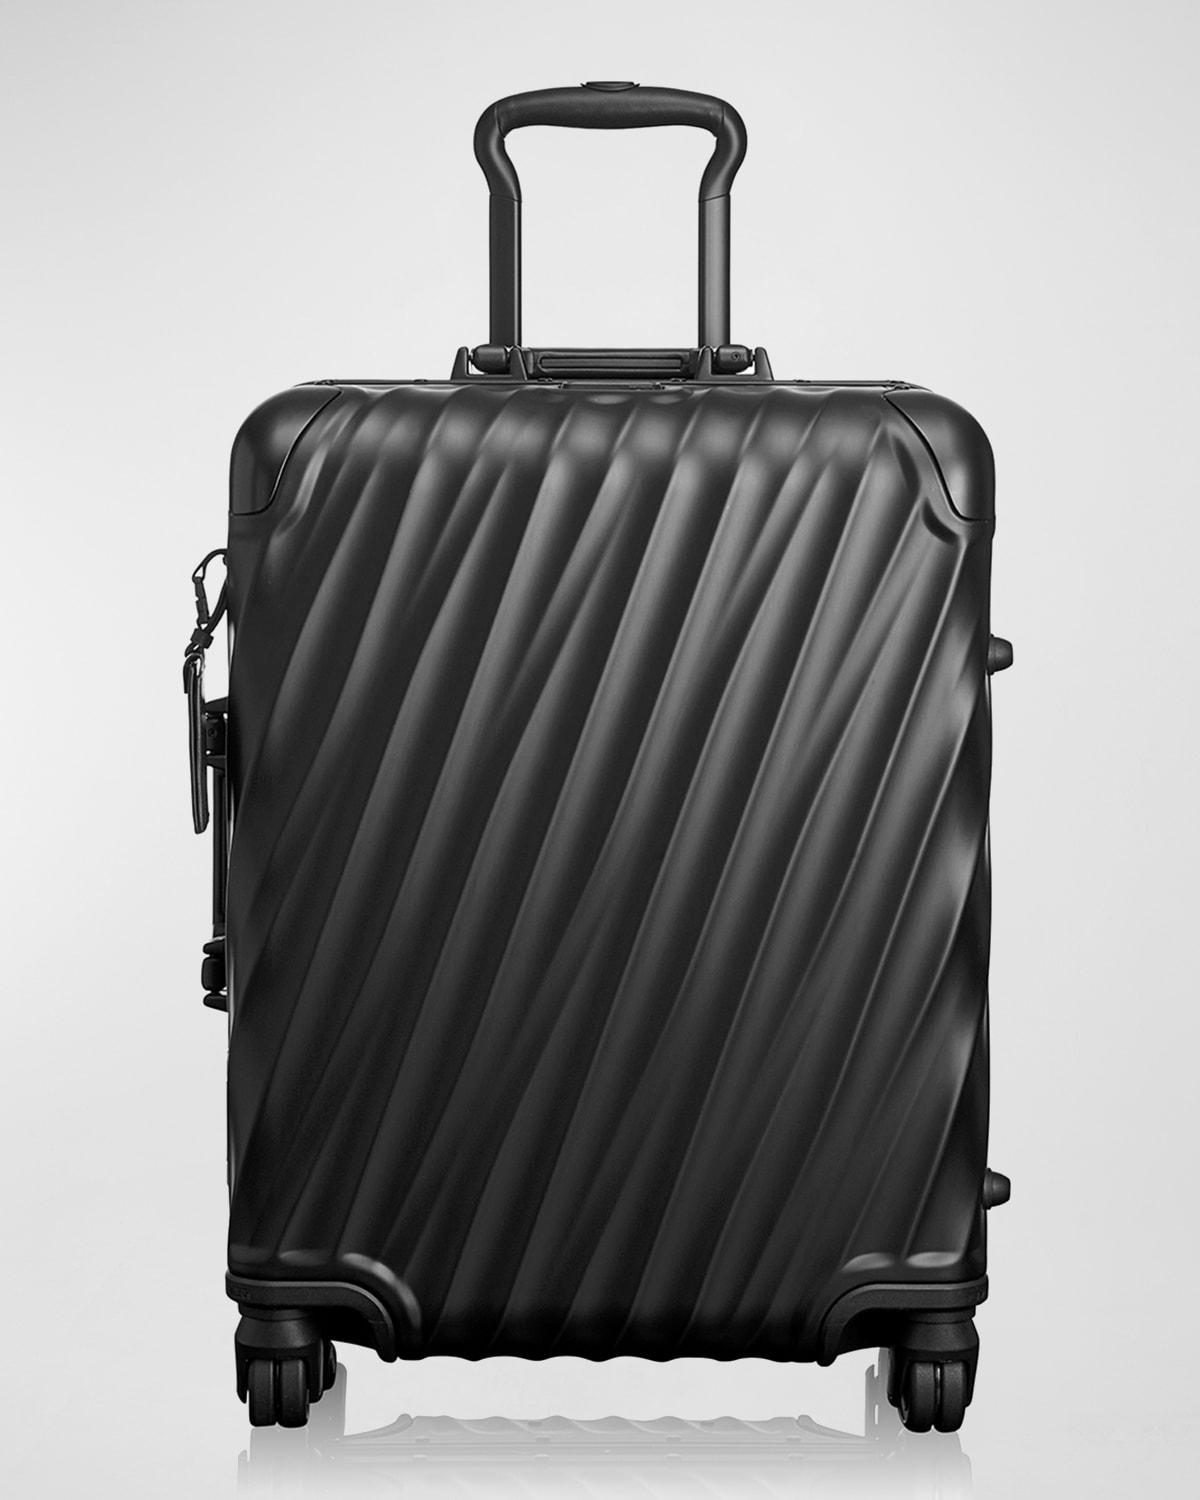 Tumi Continental Carry-on Luggage